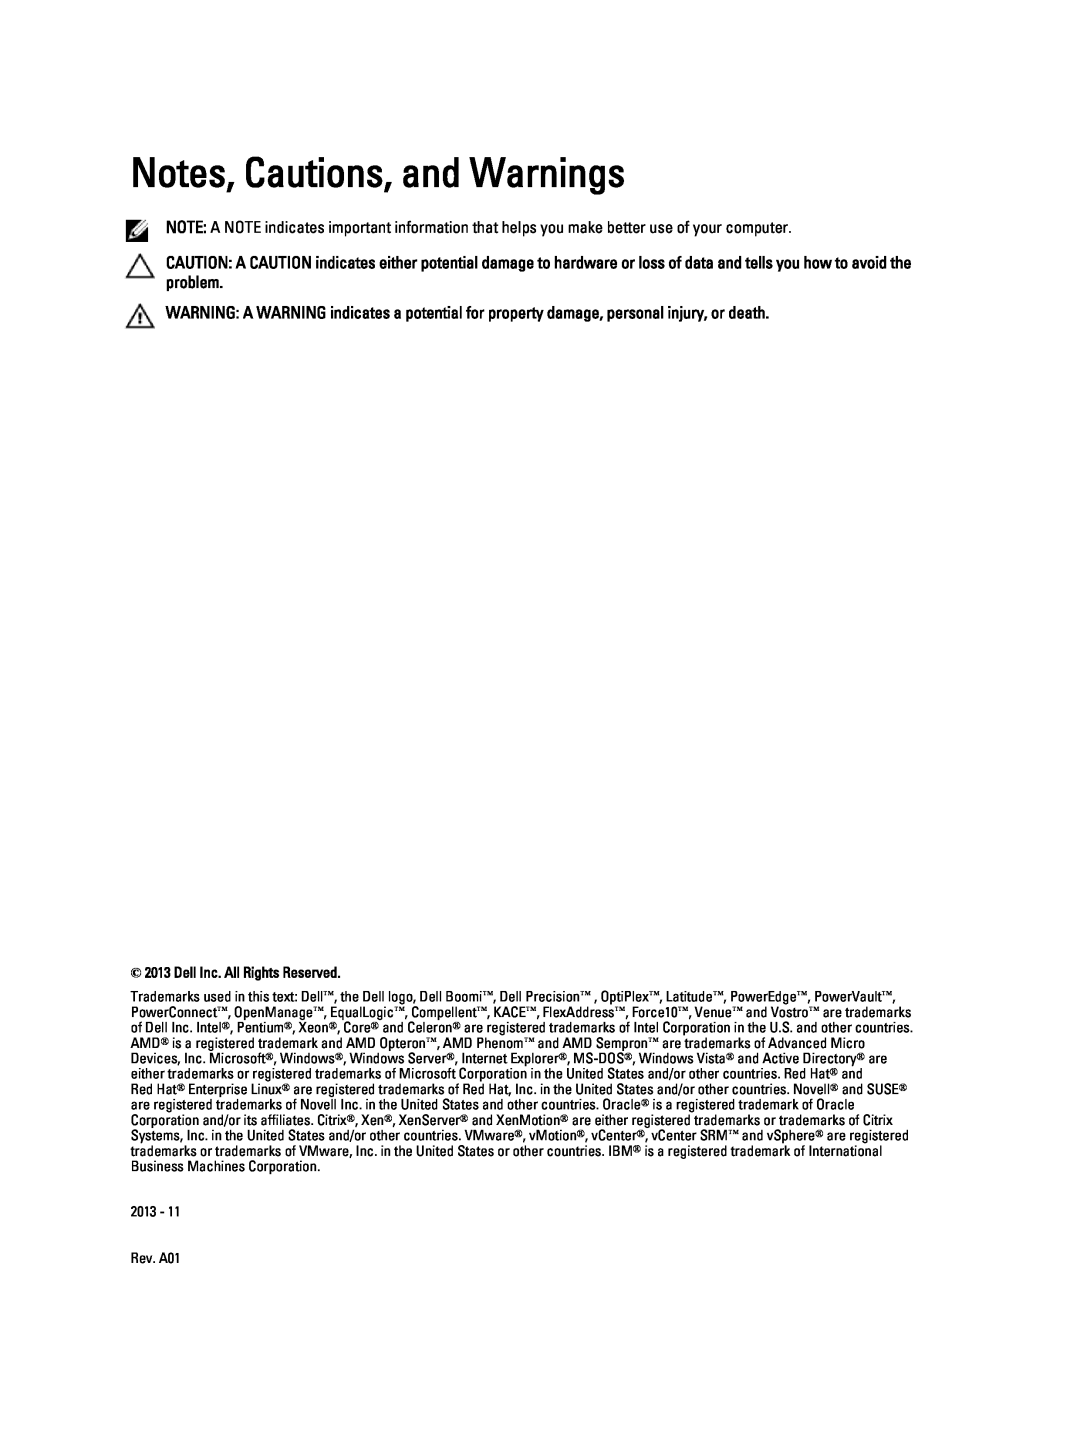 Dell W04C, 9010 owner manual Notes, Cautions, and Warnings, Dell Inc. All Rights Reserved 